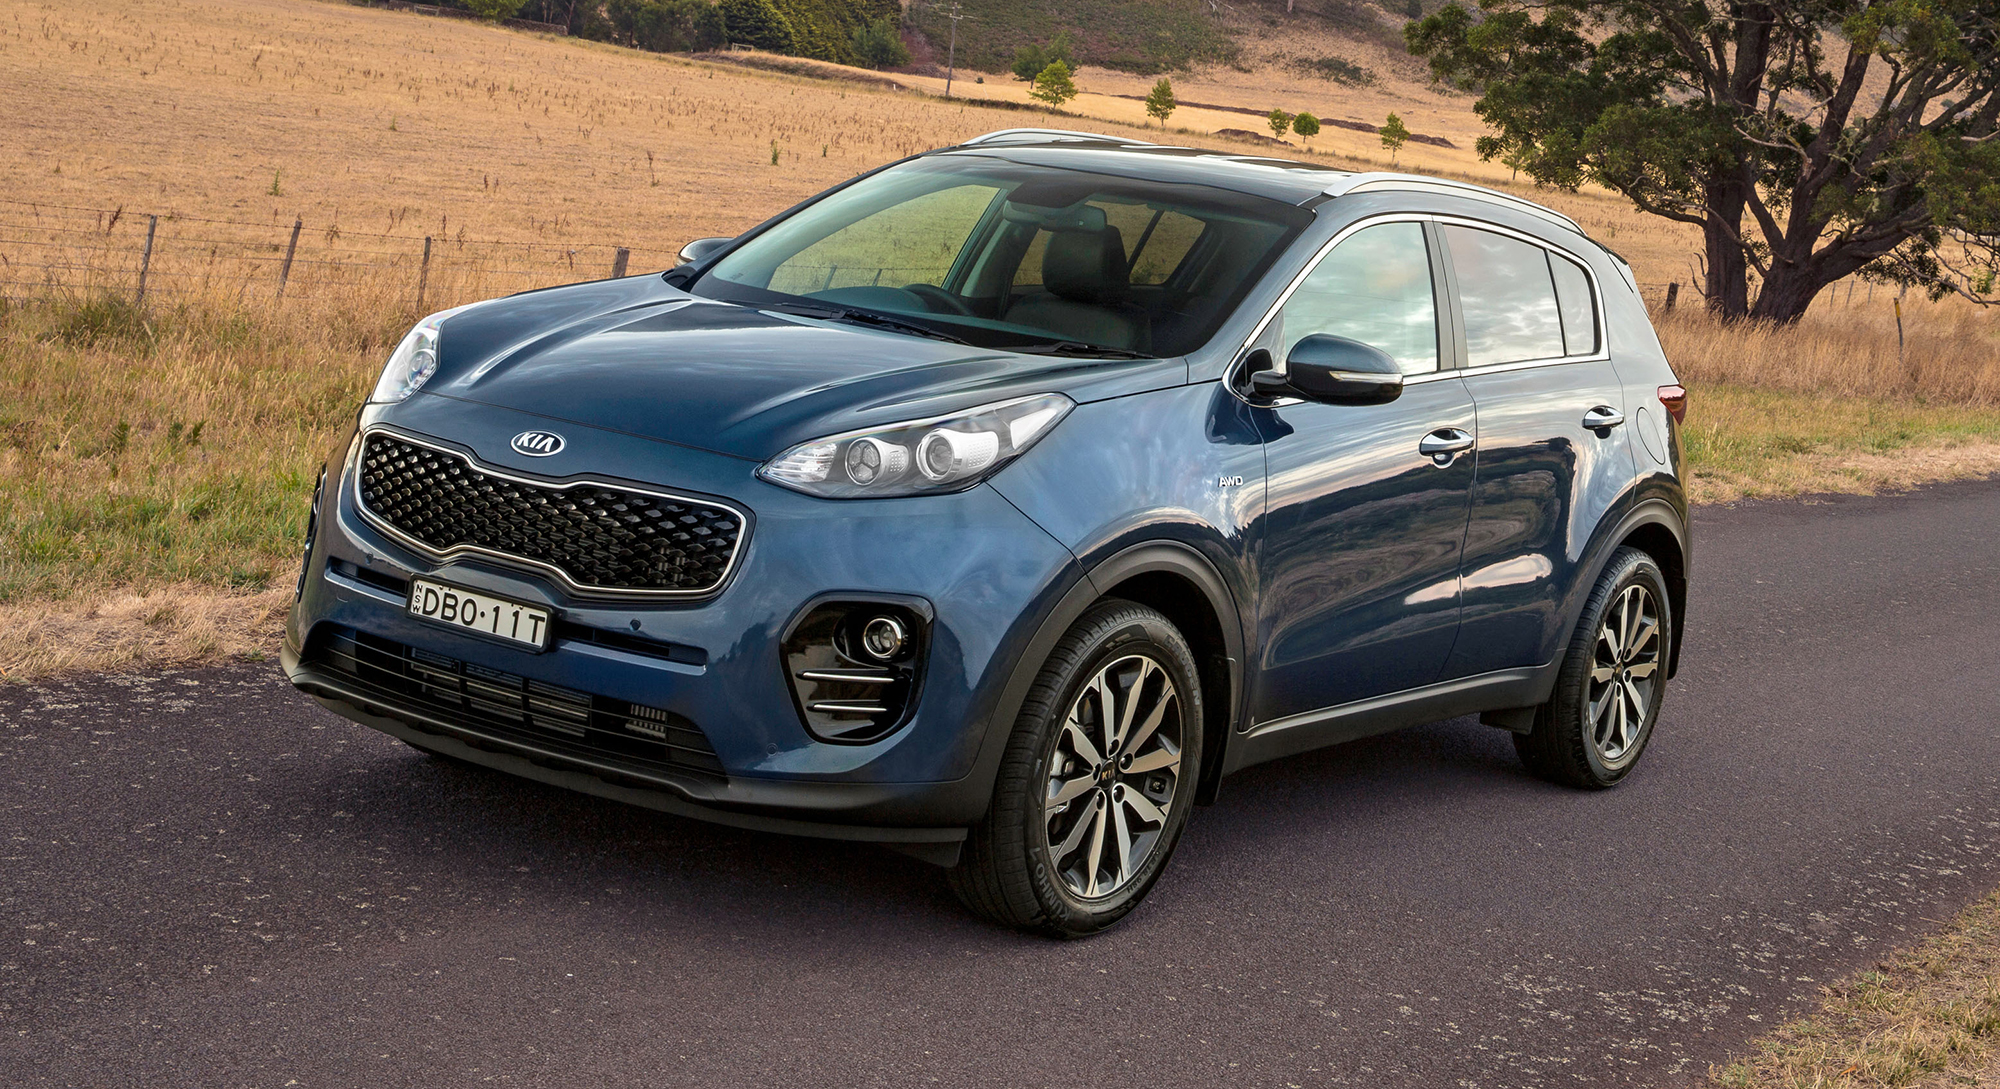 2016 Kia Sportage pricing and specifications Photos (1